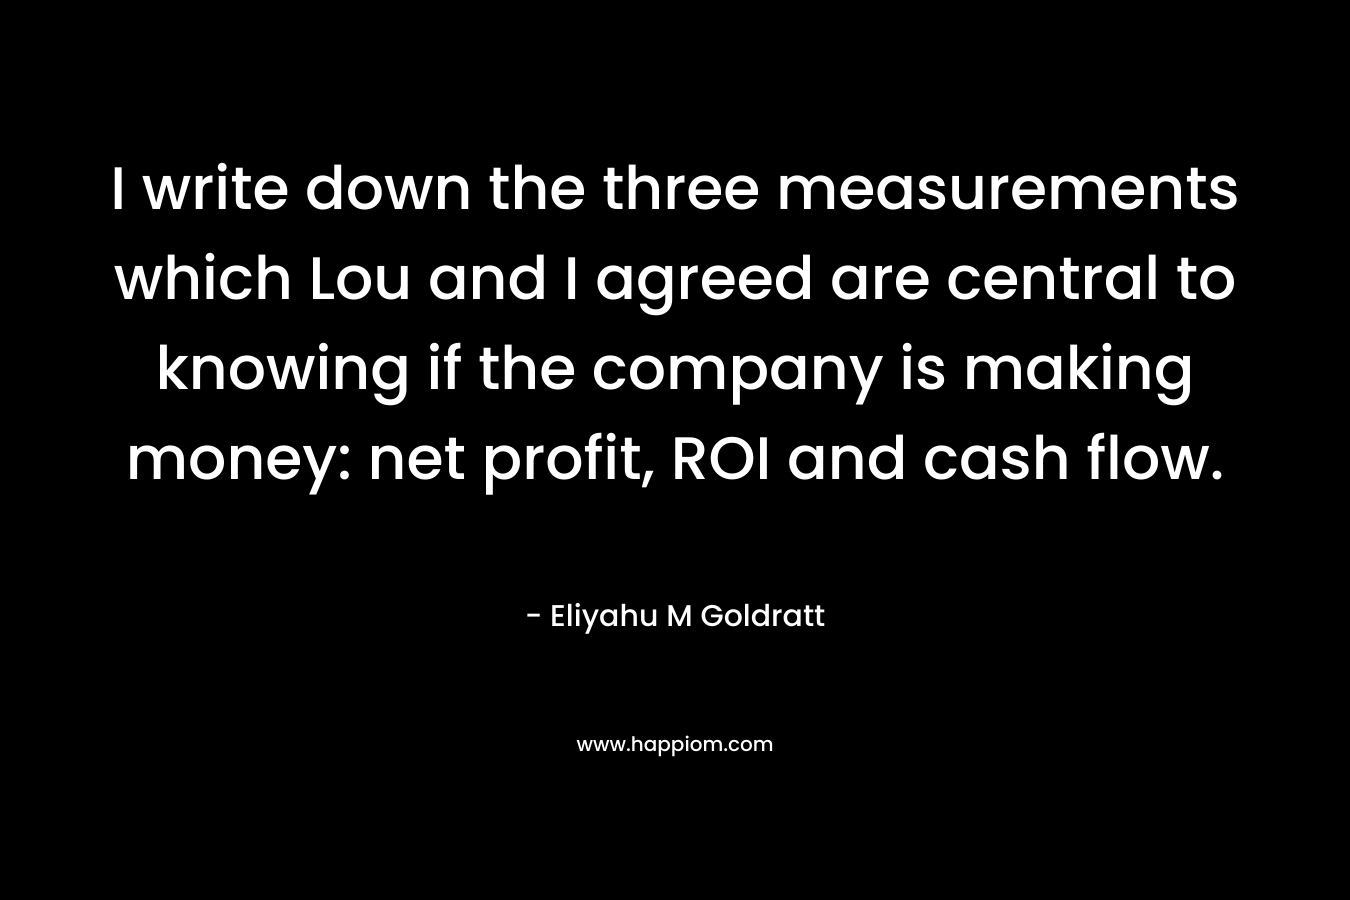 I write down the three measurements which Lou and I agreed are central to knowing if the company is making money: net profit, ROI and cash flow. – Eliyahu M Goldratt